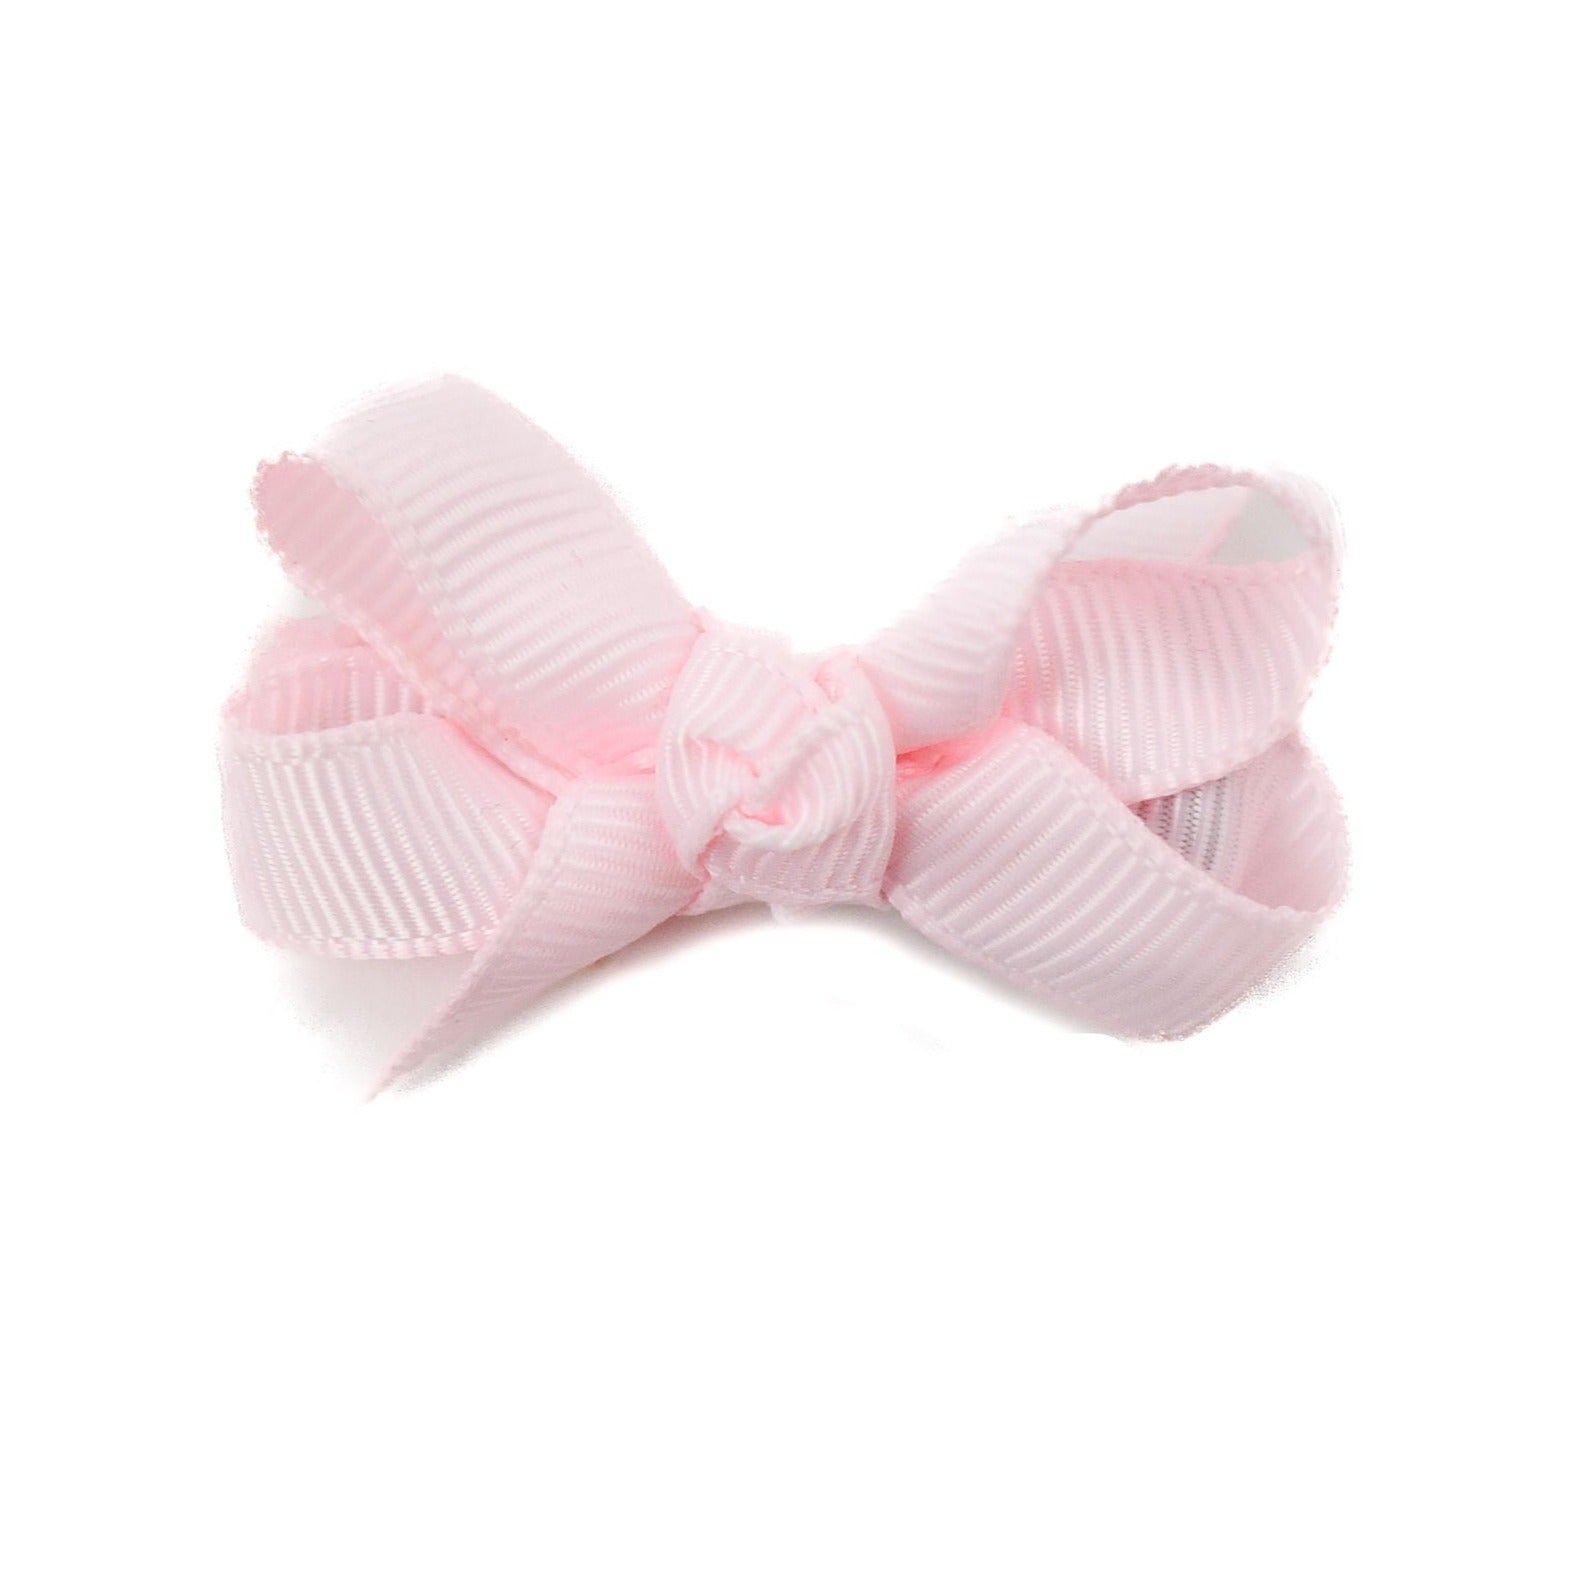 Wee Ones Baby Grosgrain Hair Bow with Center Knot - Powder Pink